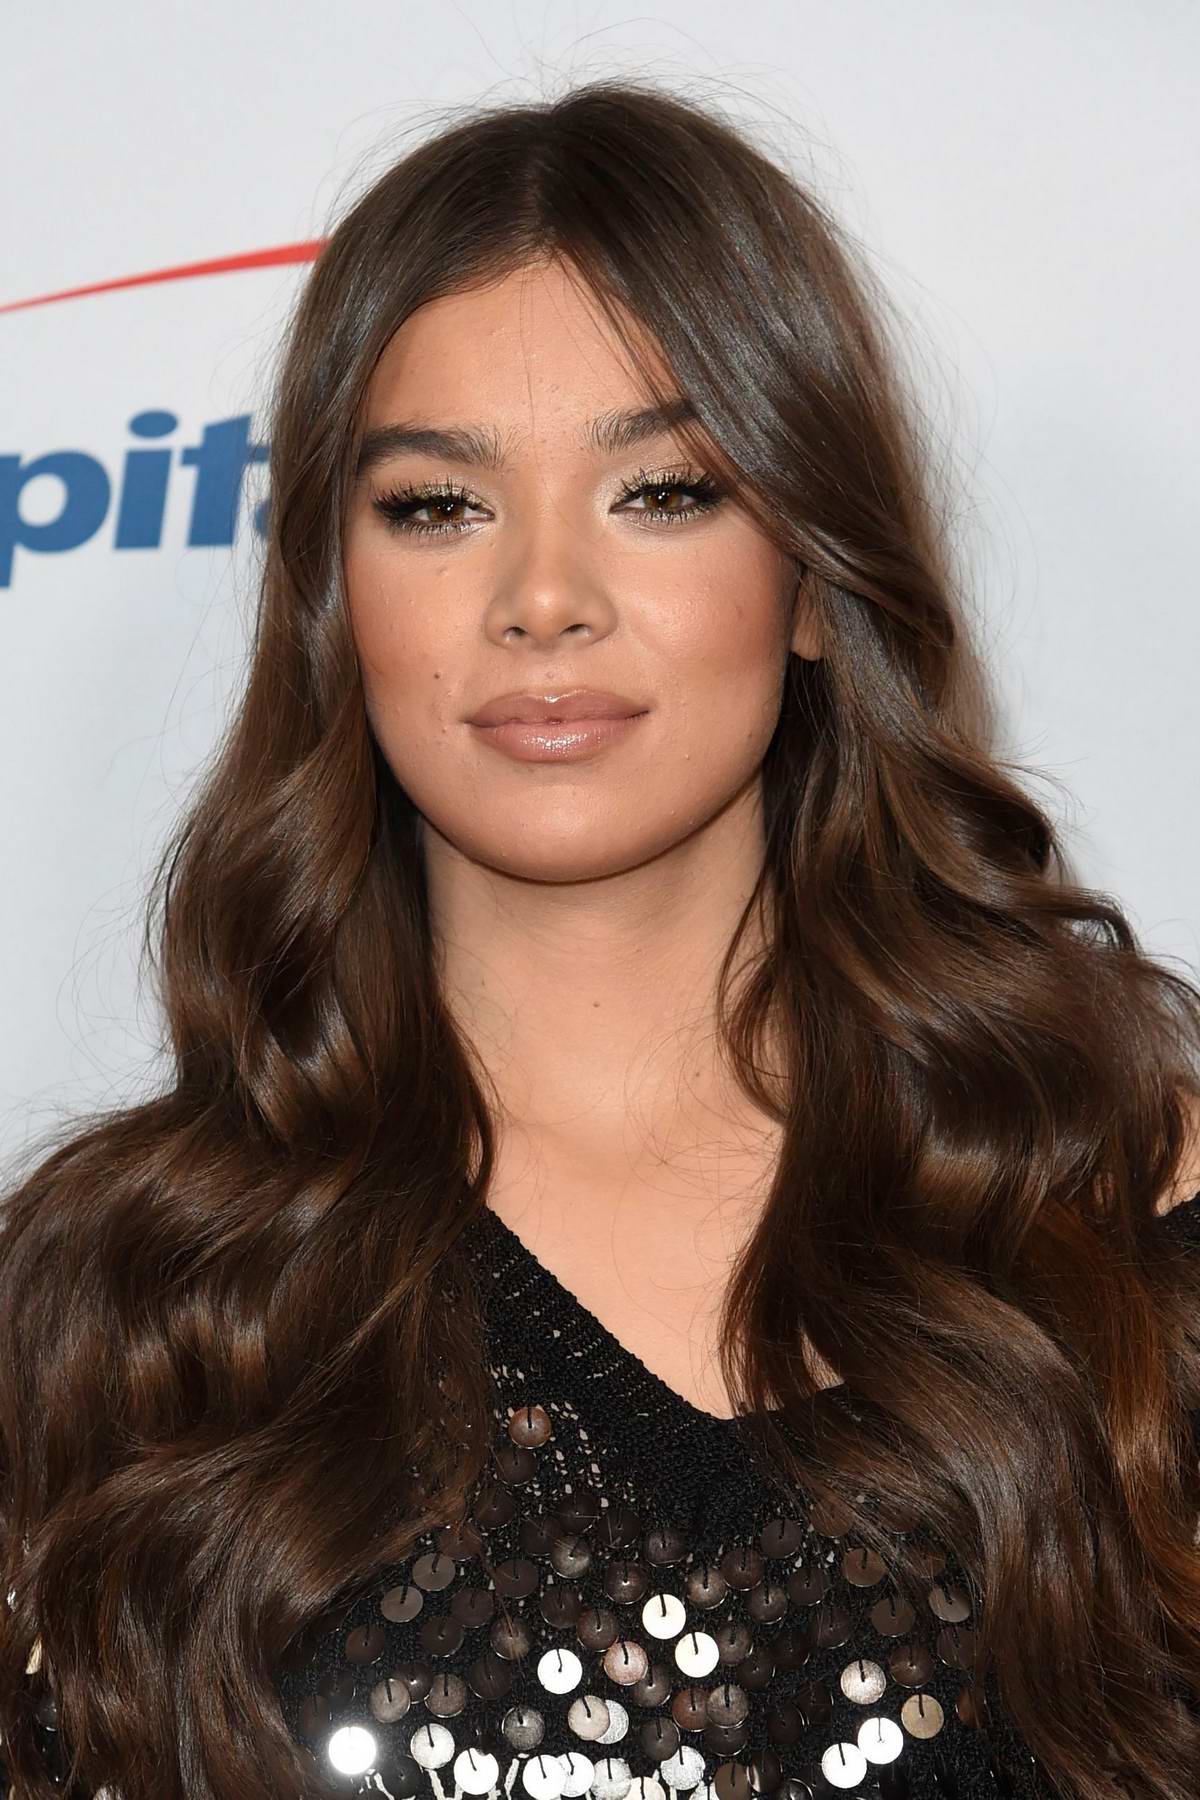 hailee steinfeld attends 102-7 kiss fm's jingle ball 2018 presented by